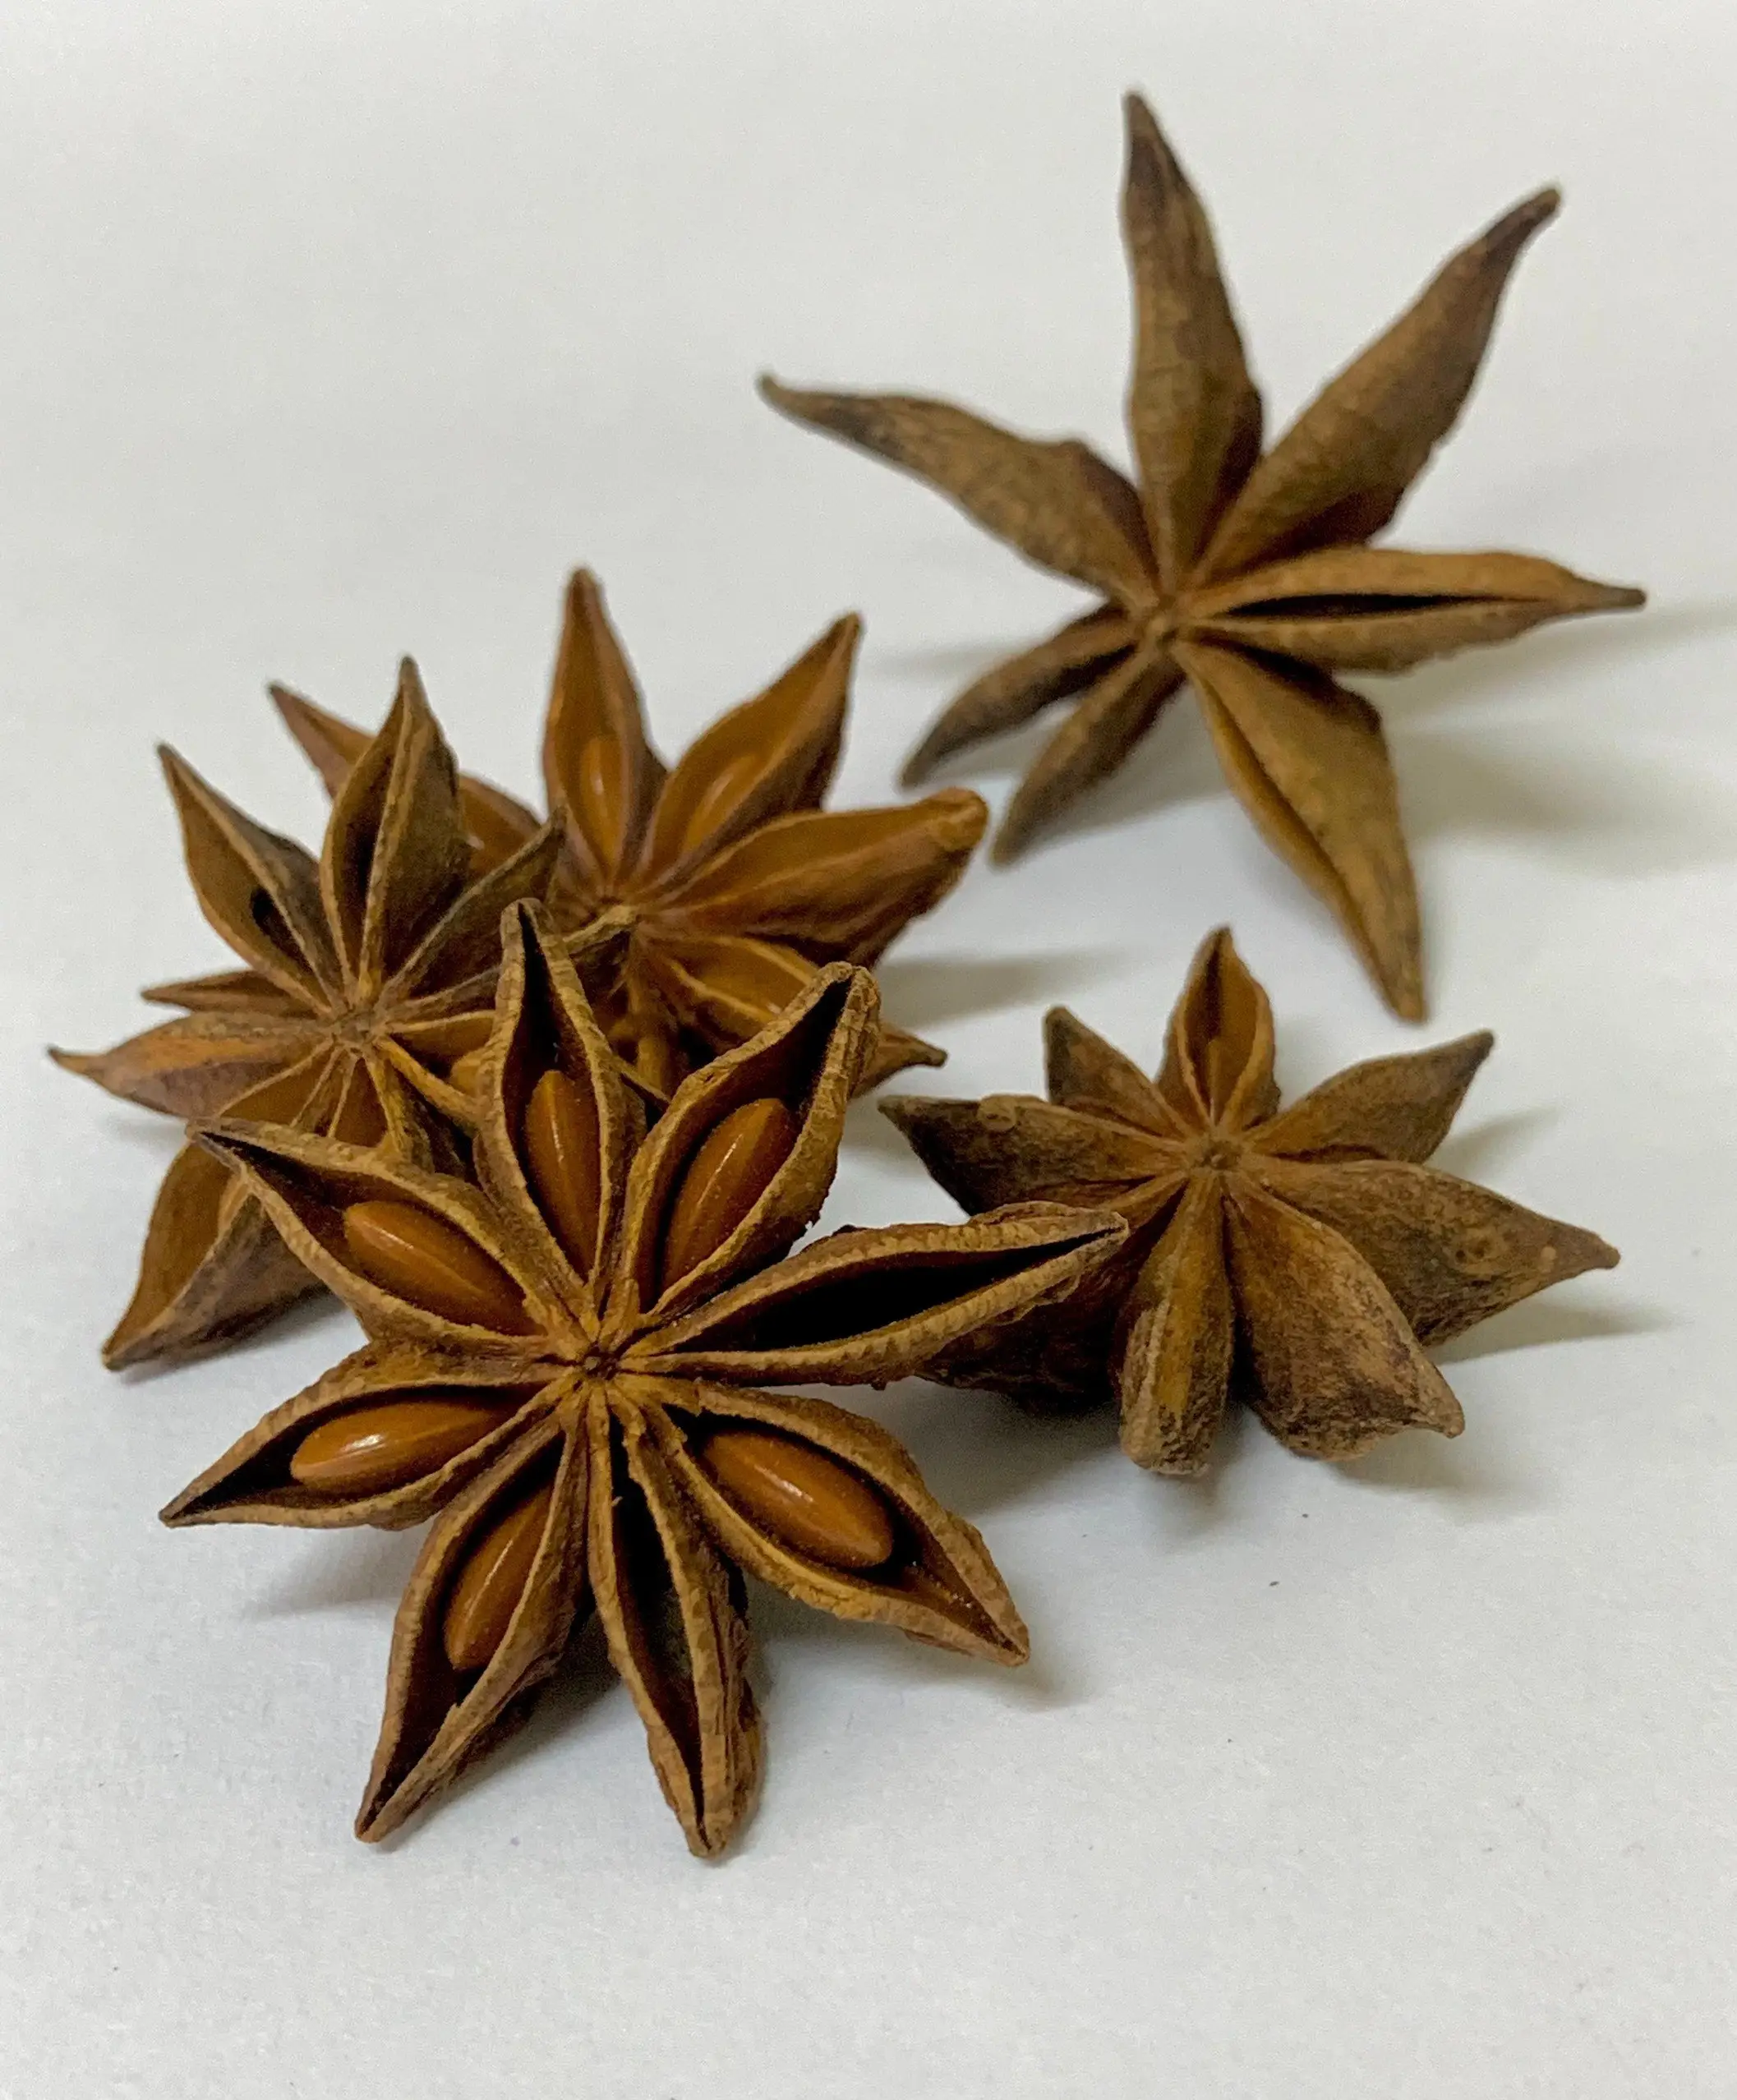 VIETNAM SPICES - STAR ANISE - Good product high quality Reasonable Price Wholesale from supplier /DC